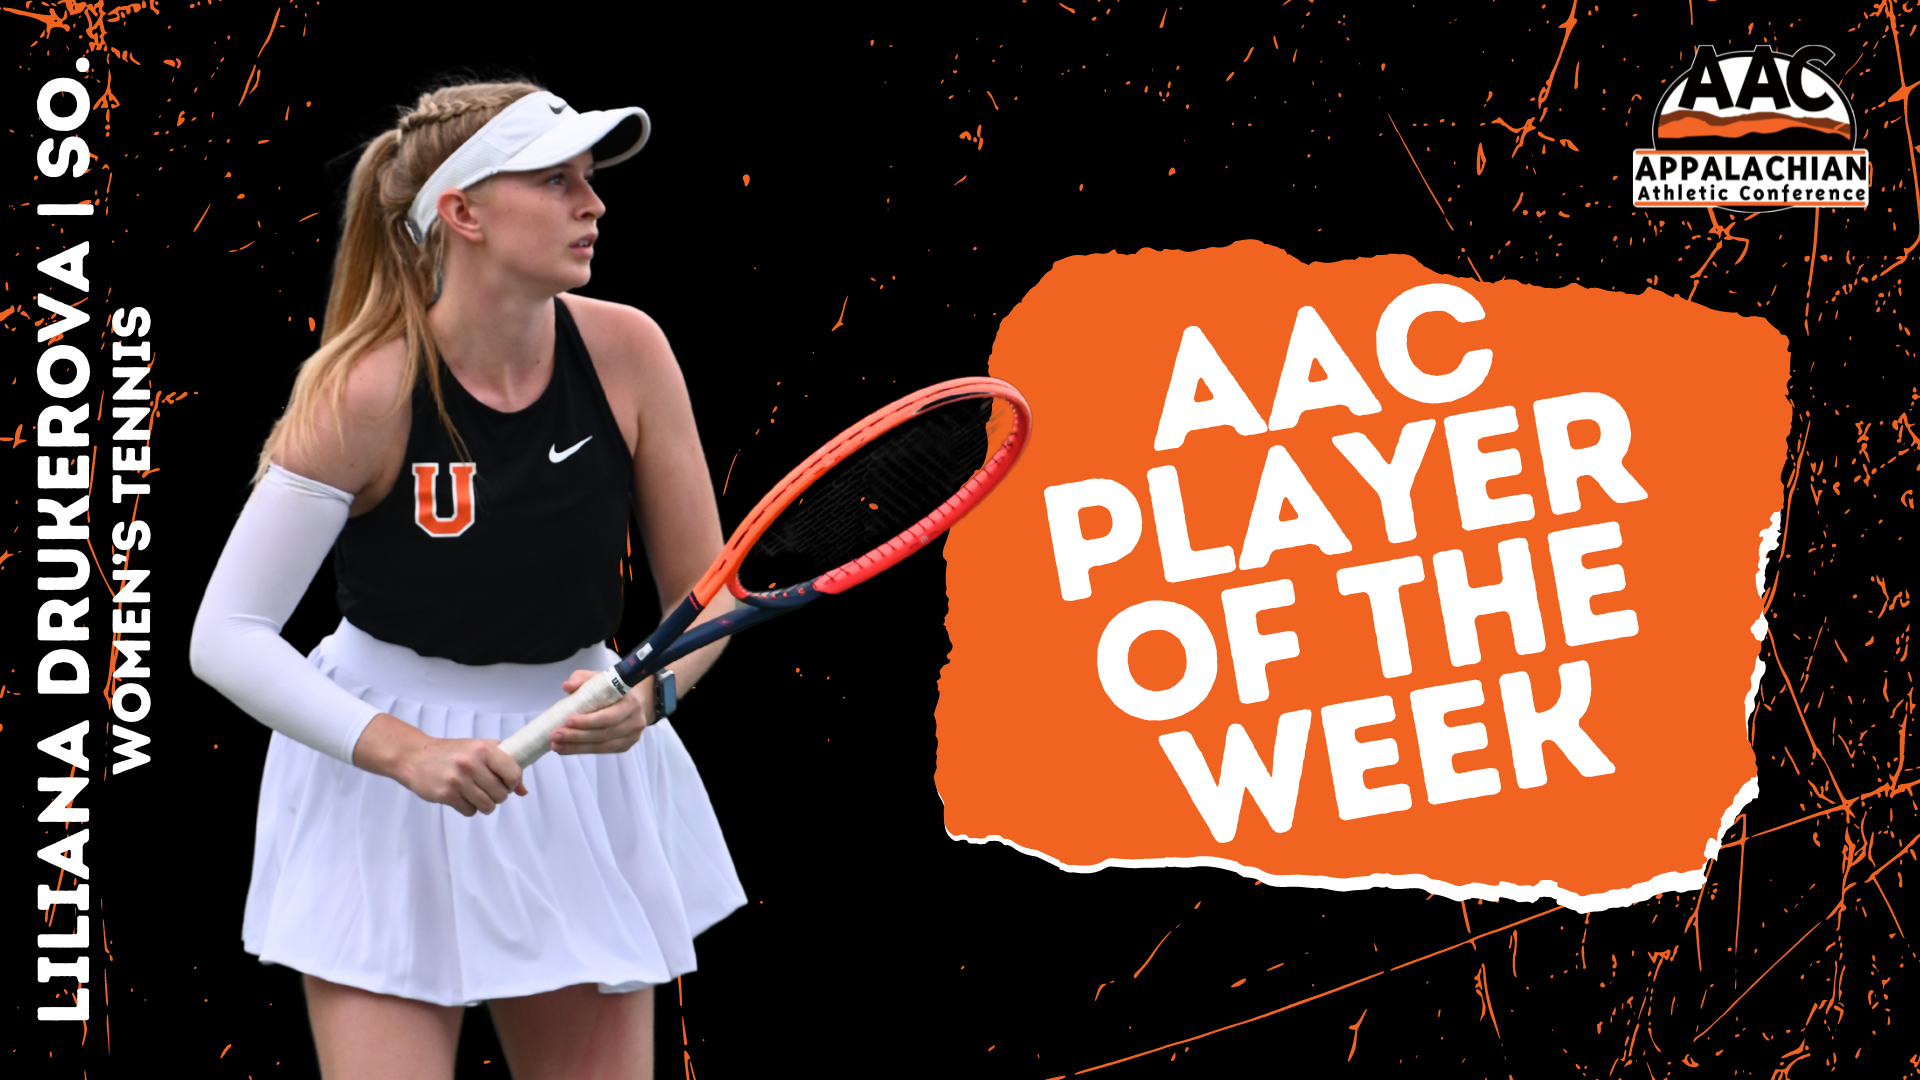 Union’s Drukerova named AAC Player of the Week for the fourth time this season